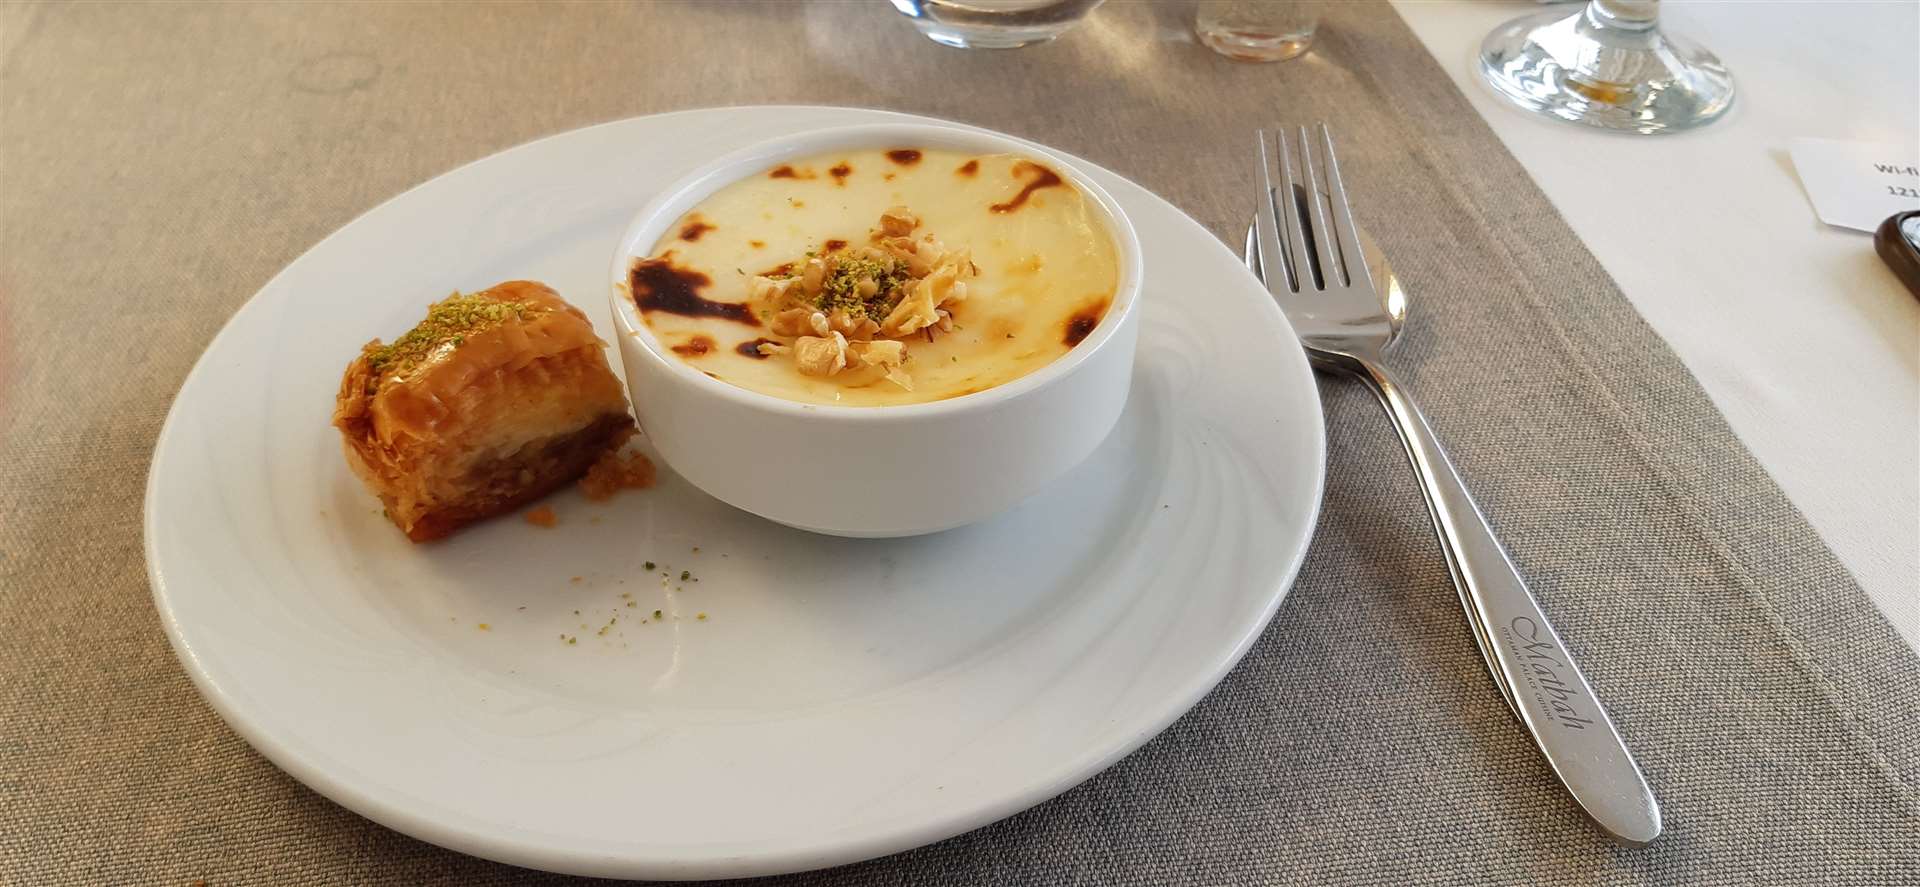 This baklava and rice pudding combo was a winner. Photo: Sean Delaney